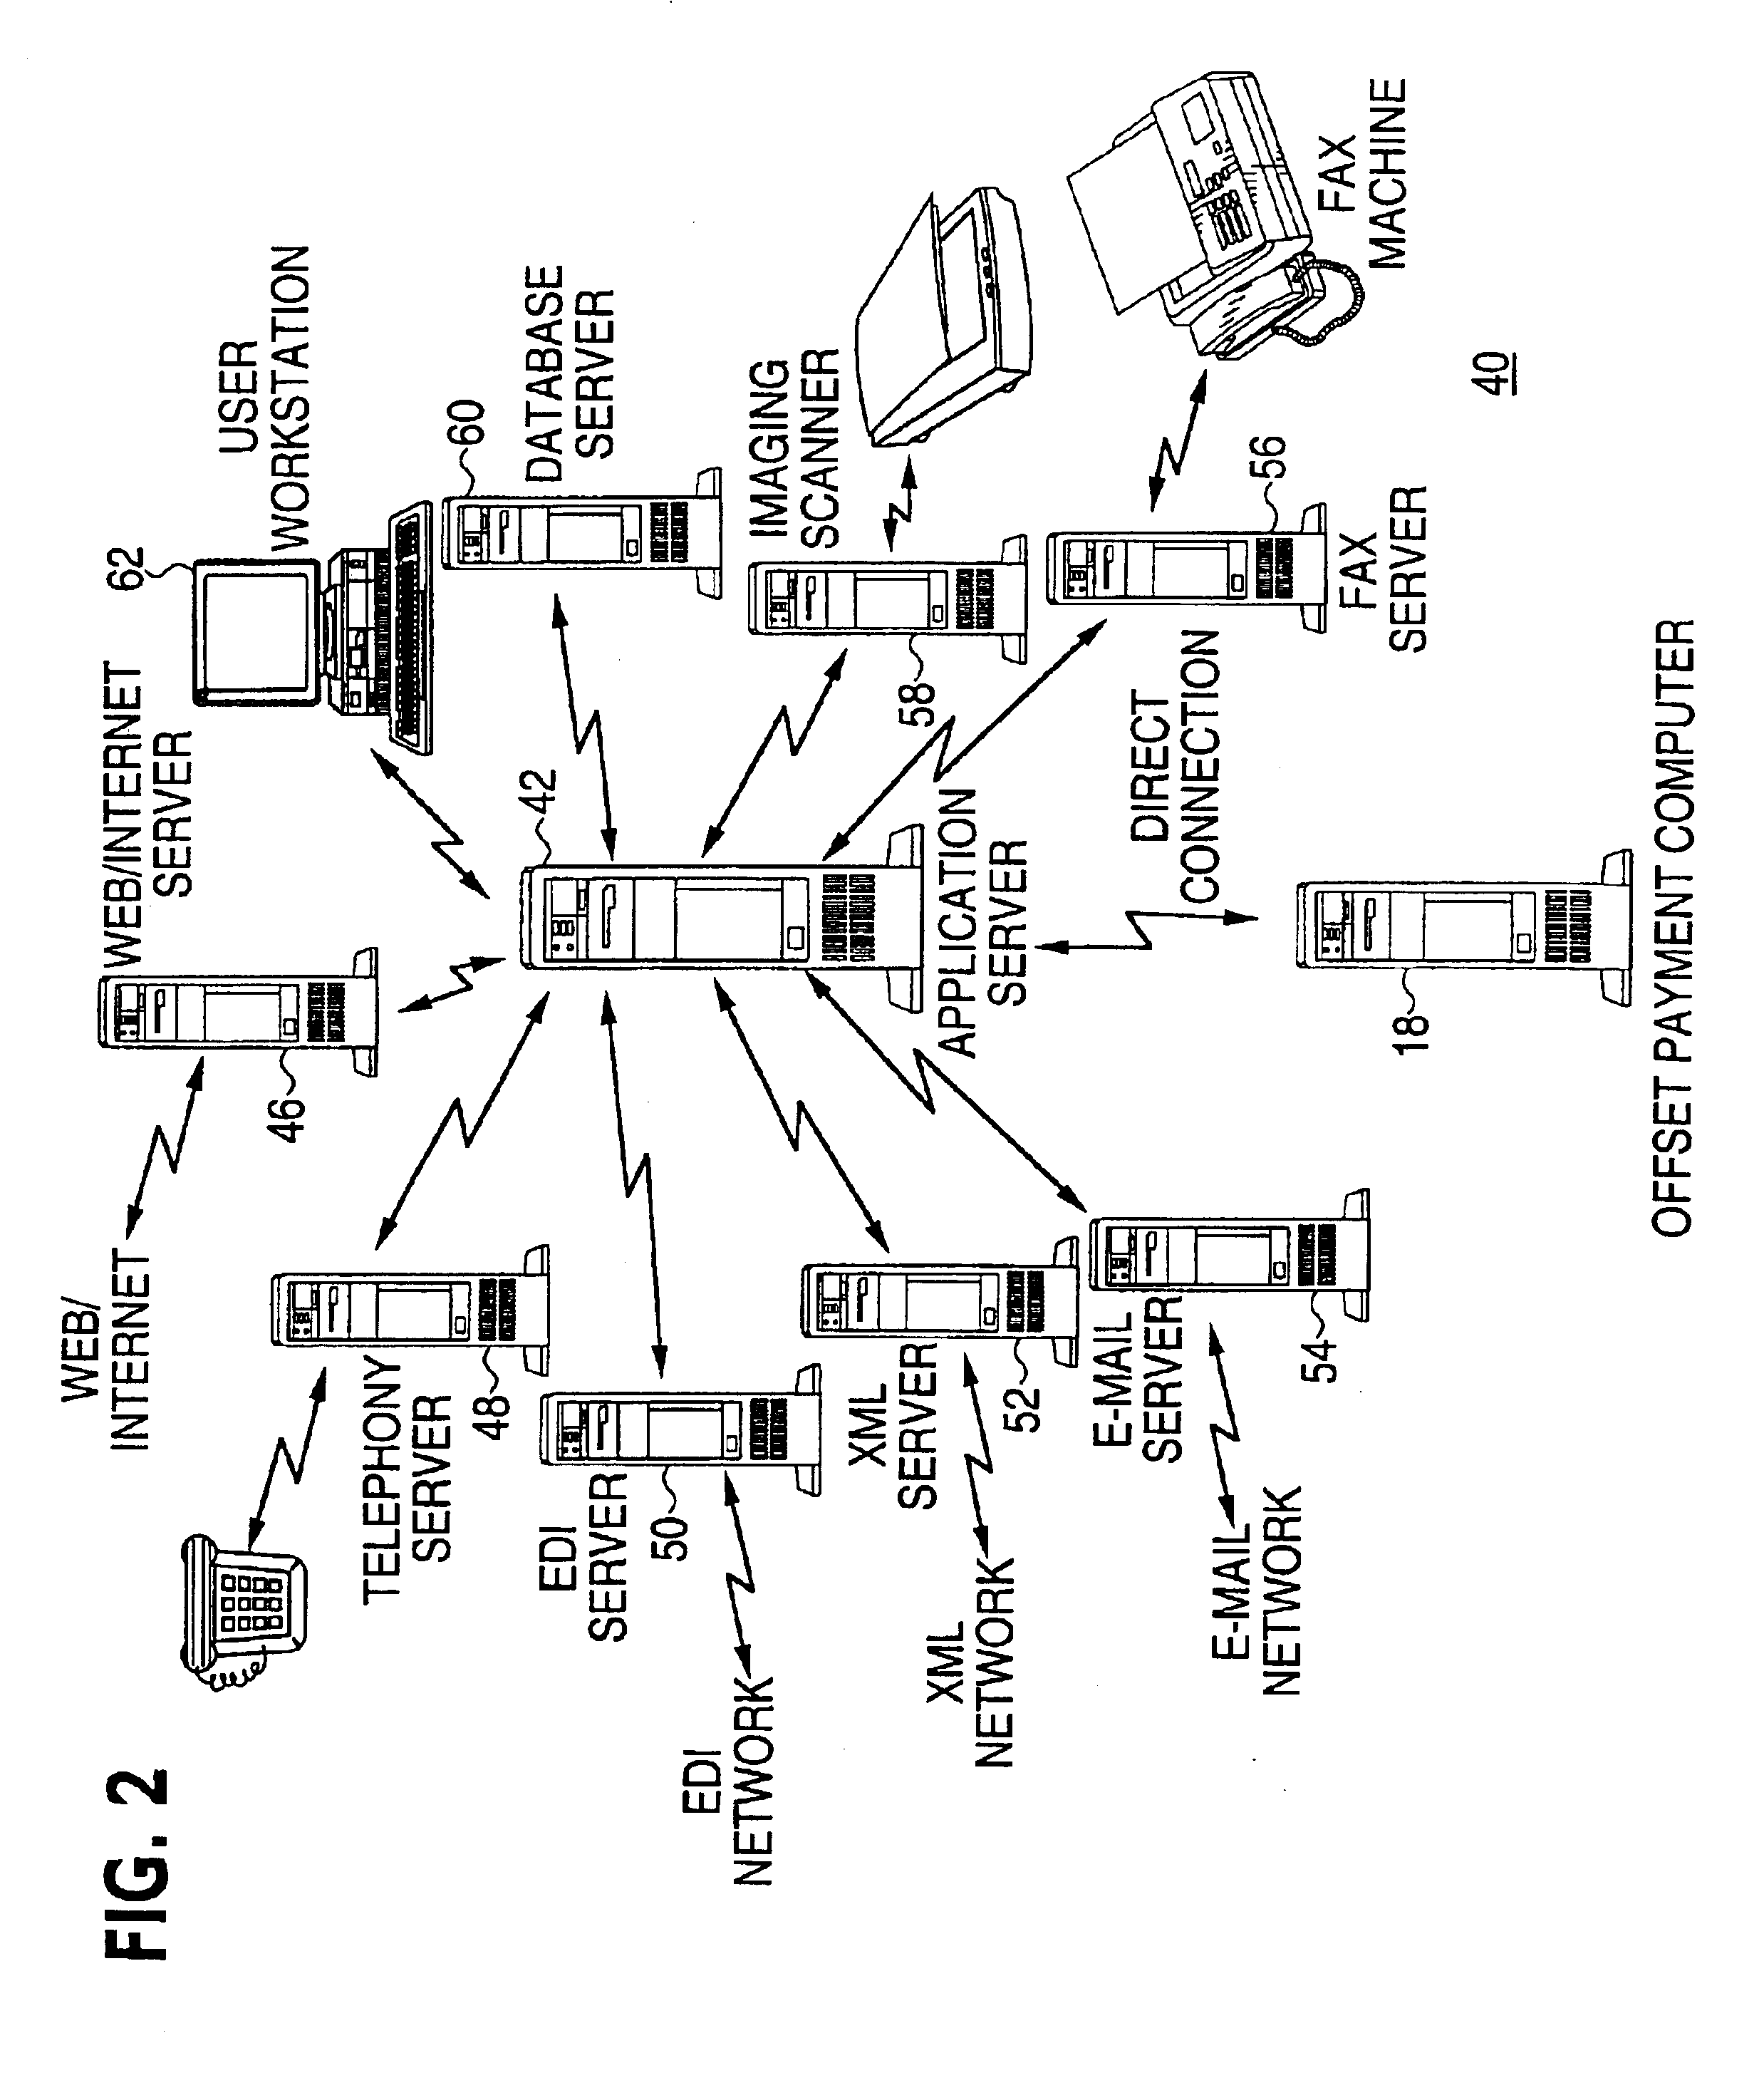 Financial management system including an offset payment process